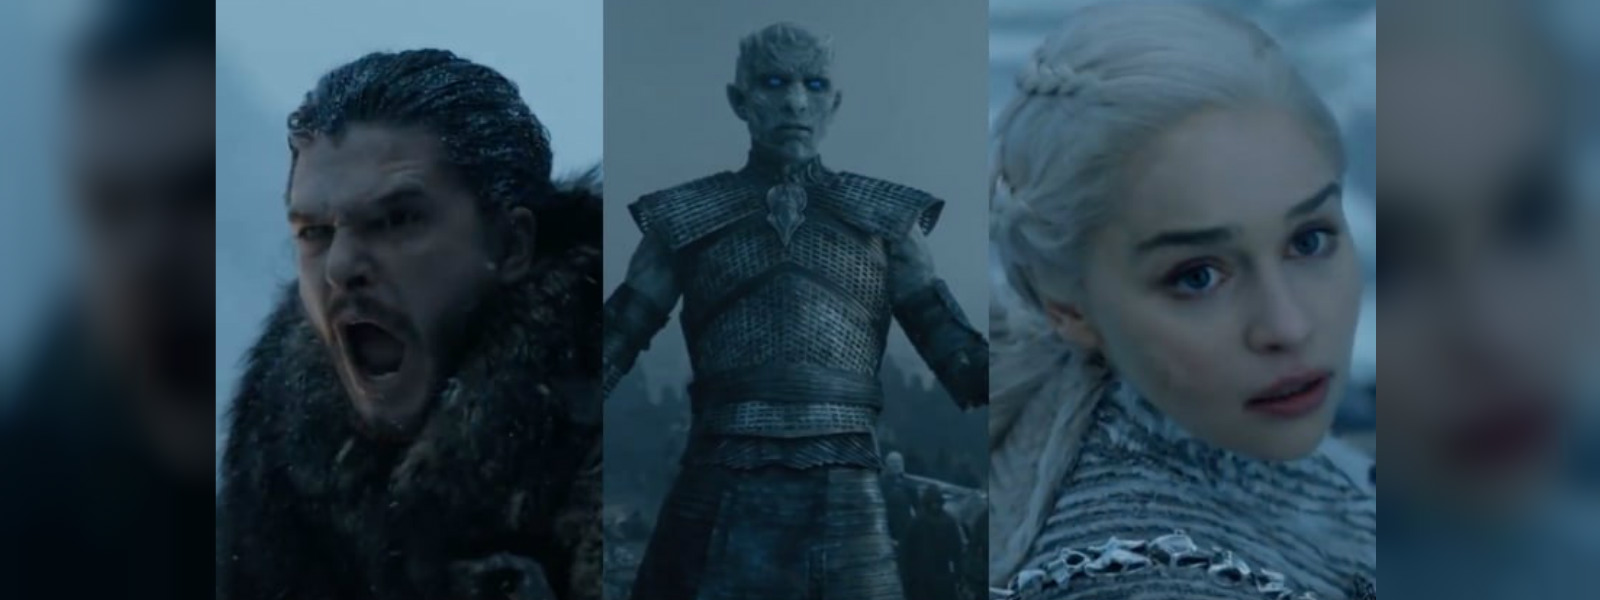 'Game of Thrones' final season teaser trailer out